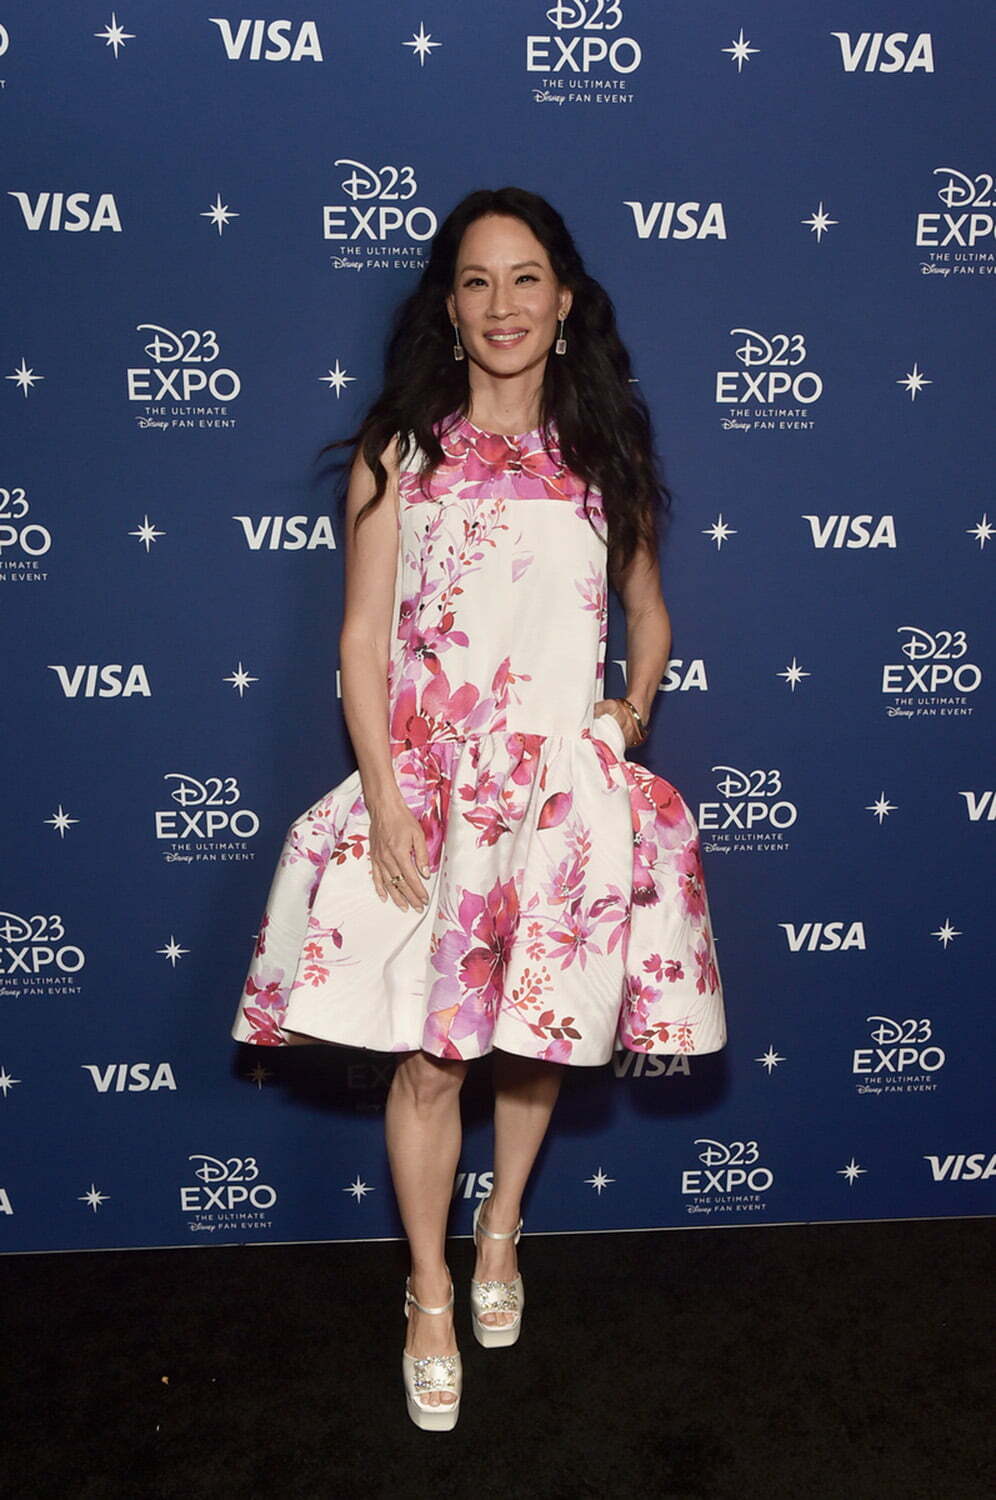 Lucy Liu attends D23 Expo 2022 at Anaheim Convention Center in Anaheim, California on September 09, 2022.